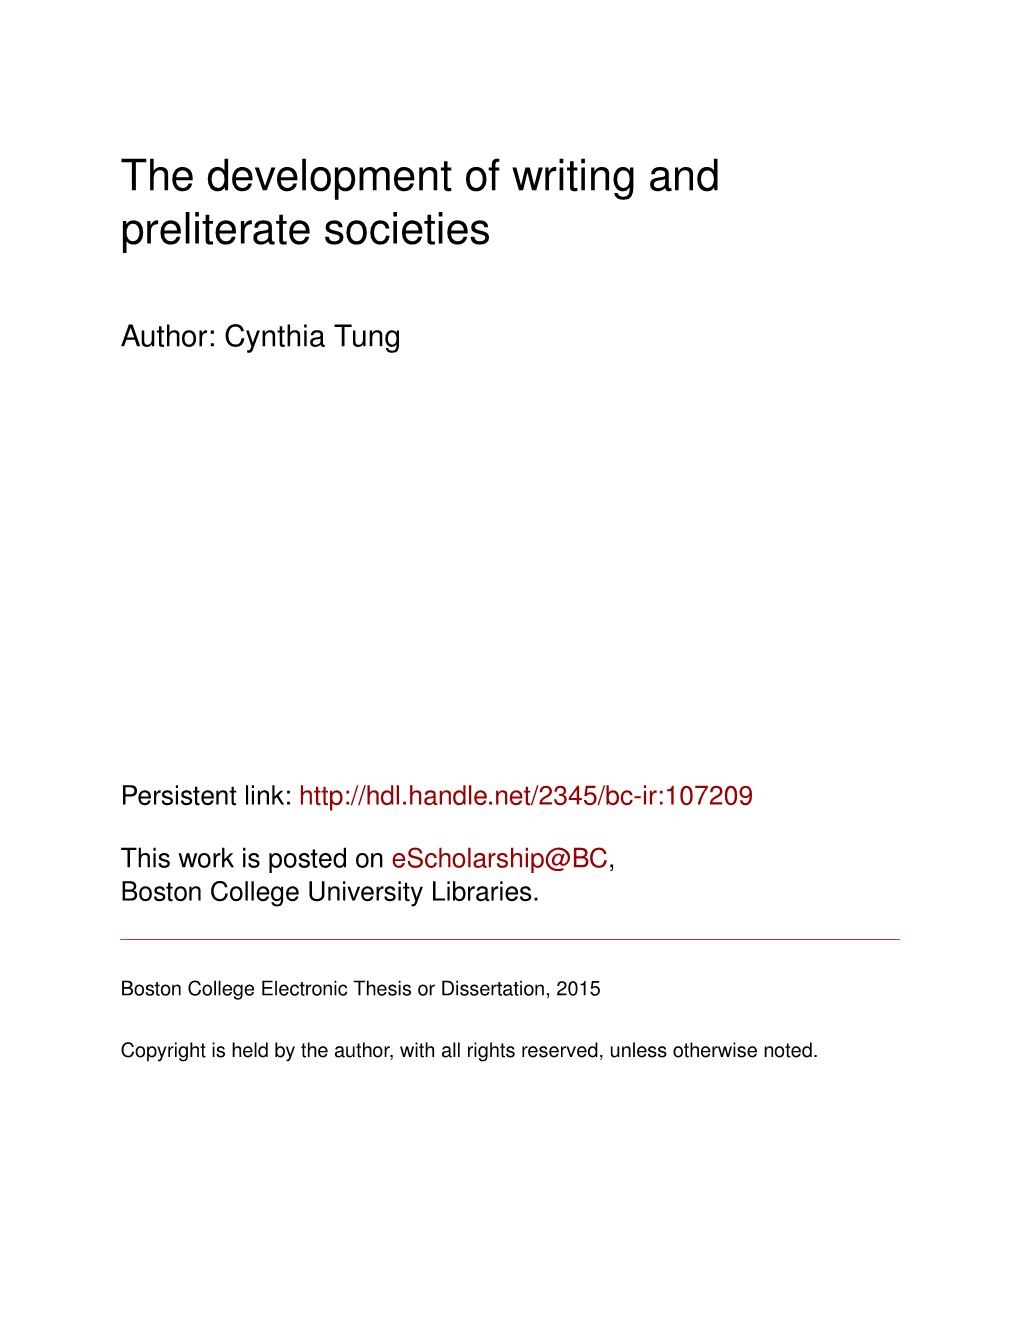 The Development of Writing and Preliterate Societies